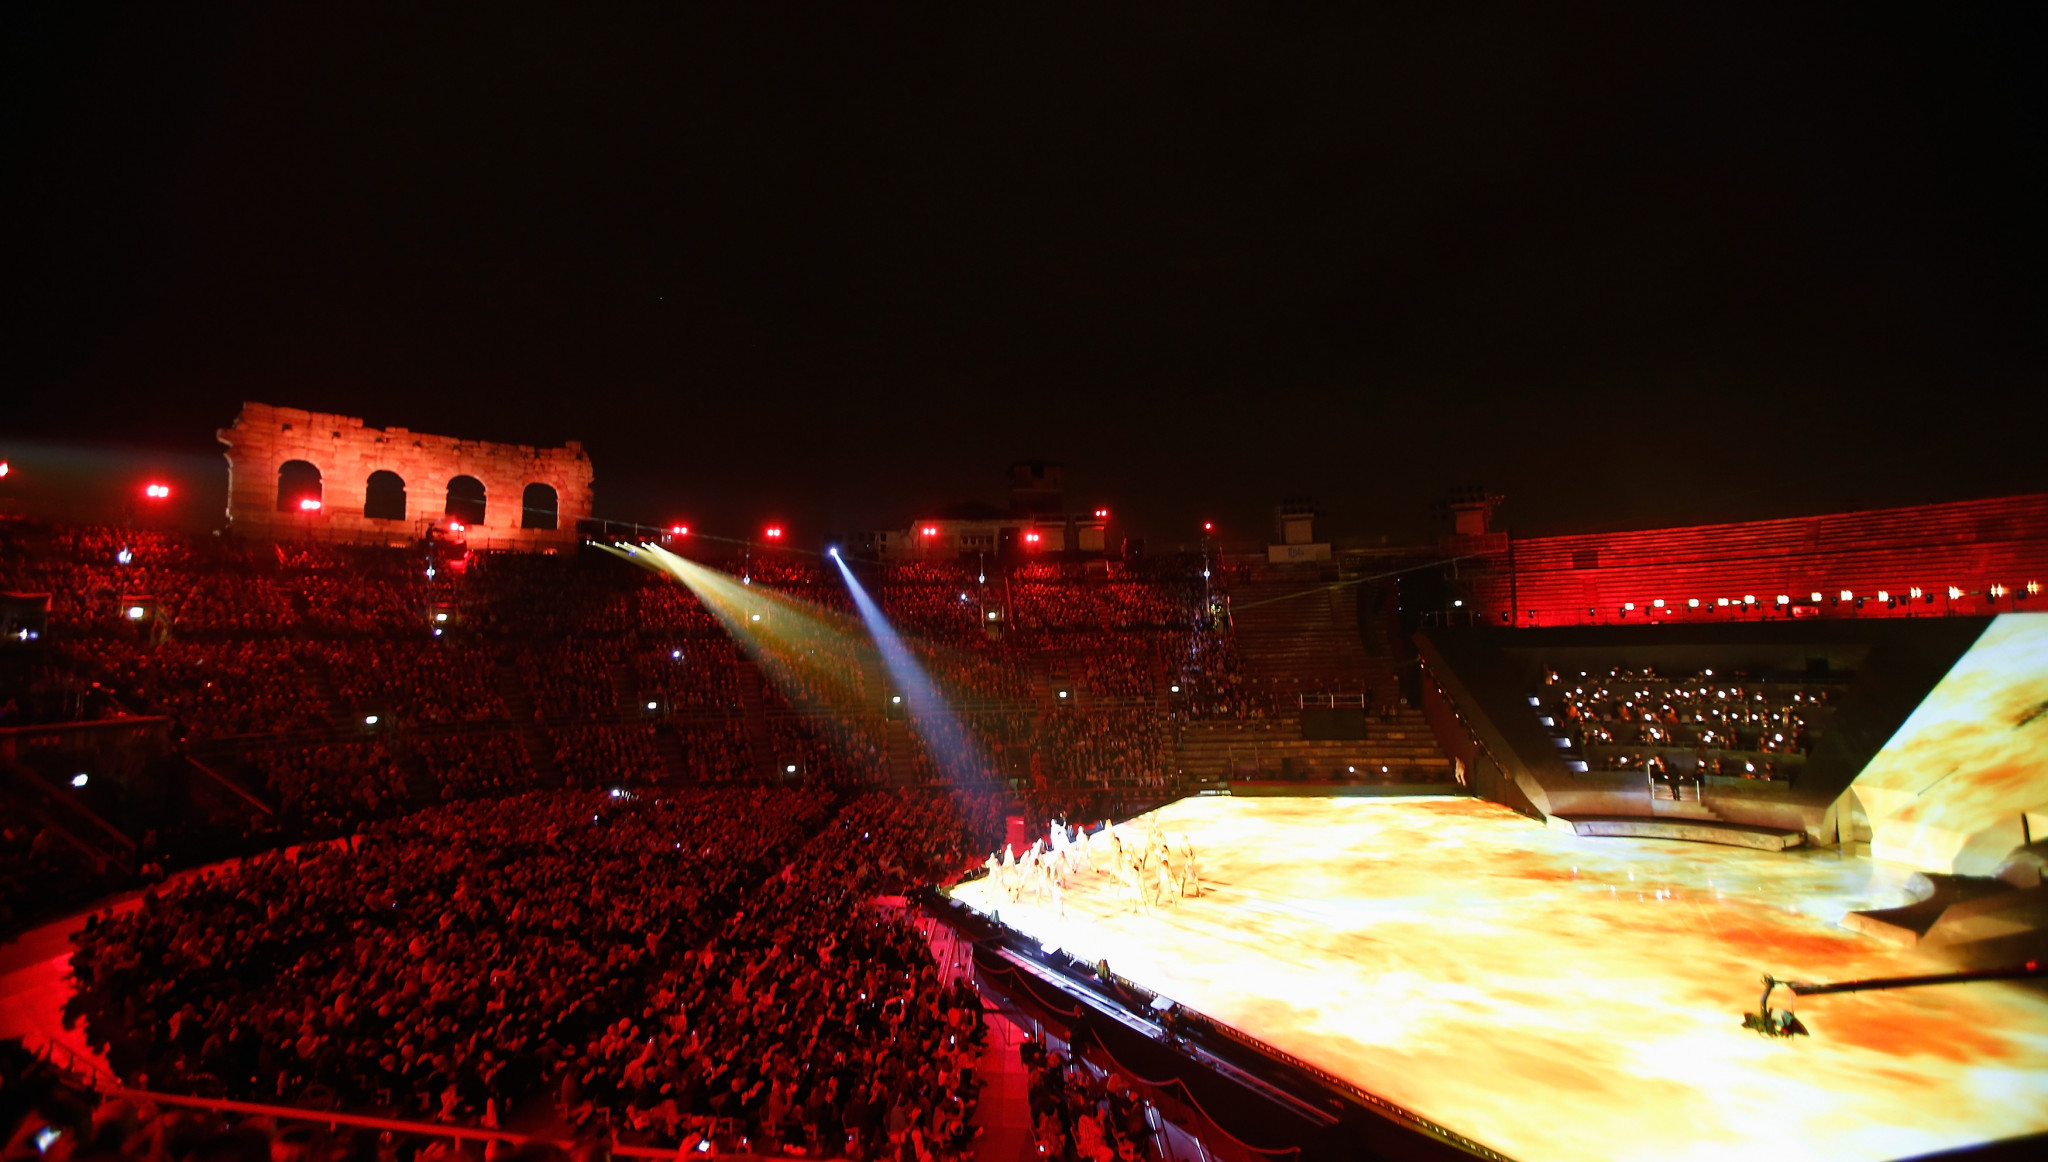 The Verona Arena hosts around 22,000 people for opera performances ©Getty Images